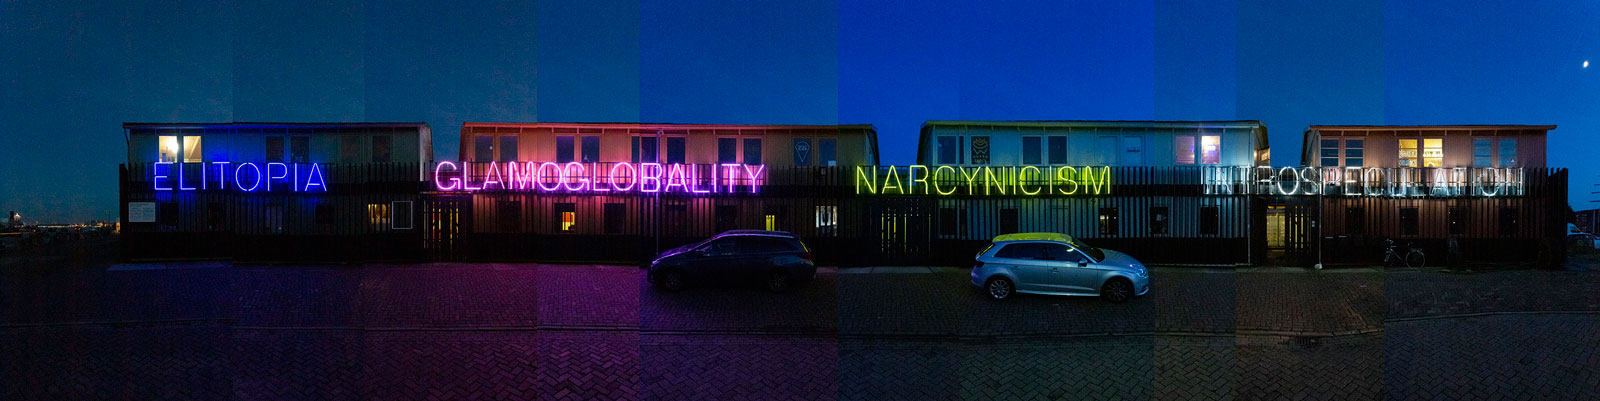 night montage photo of elitopia glamglobality narcynicism introspeculation by An­naik Lou Pit­teloud image by marc faasse